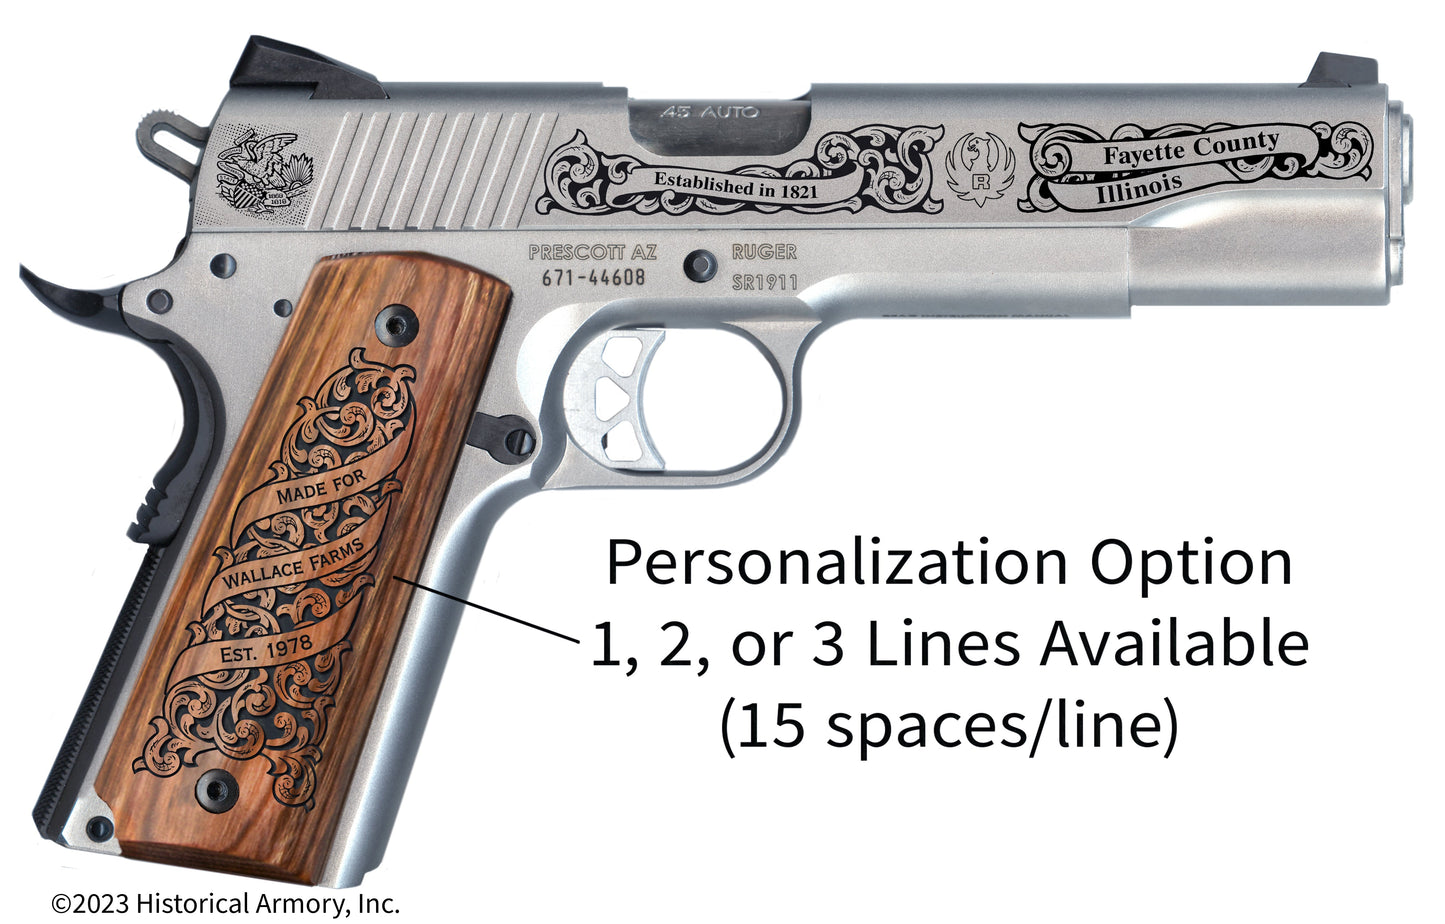 Fayette County Illinois Personalized Engraved .45 Auto Ruger 1911